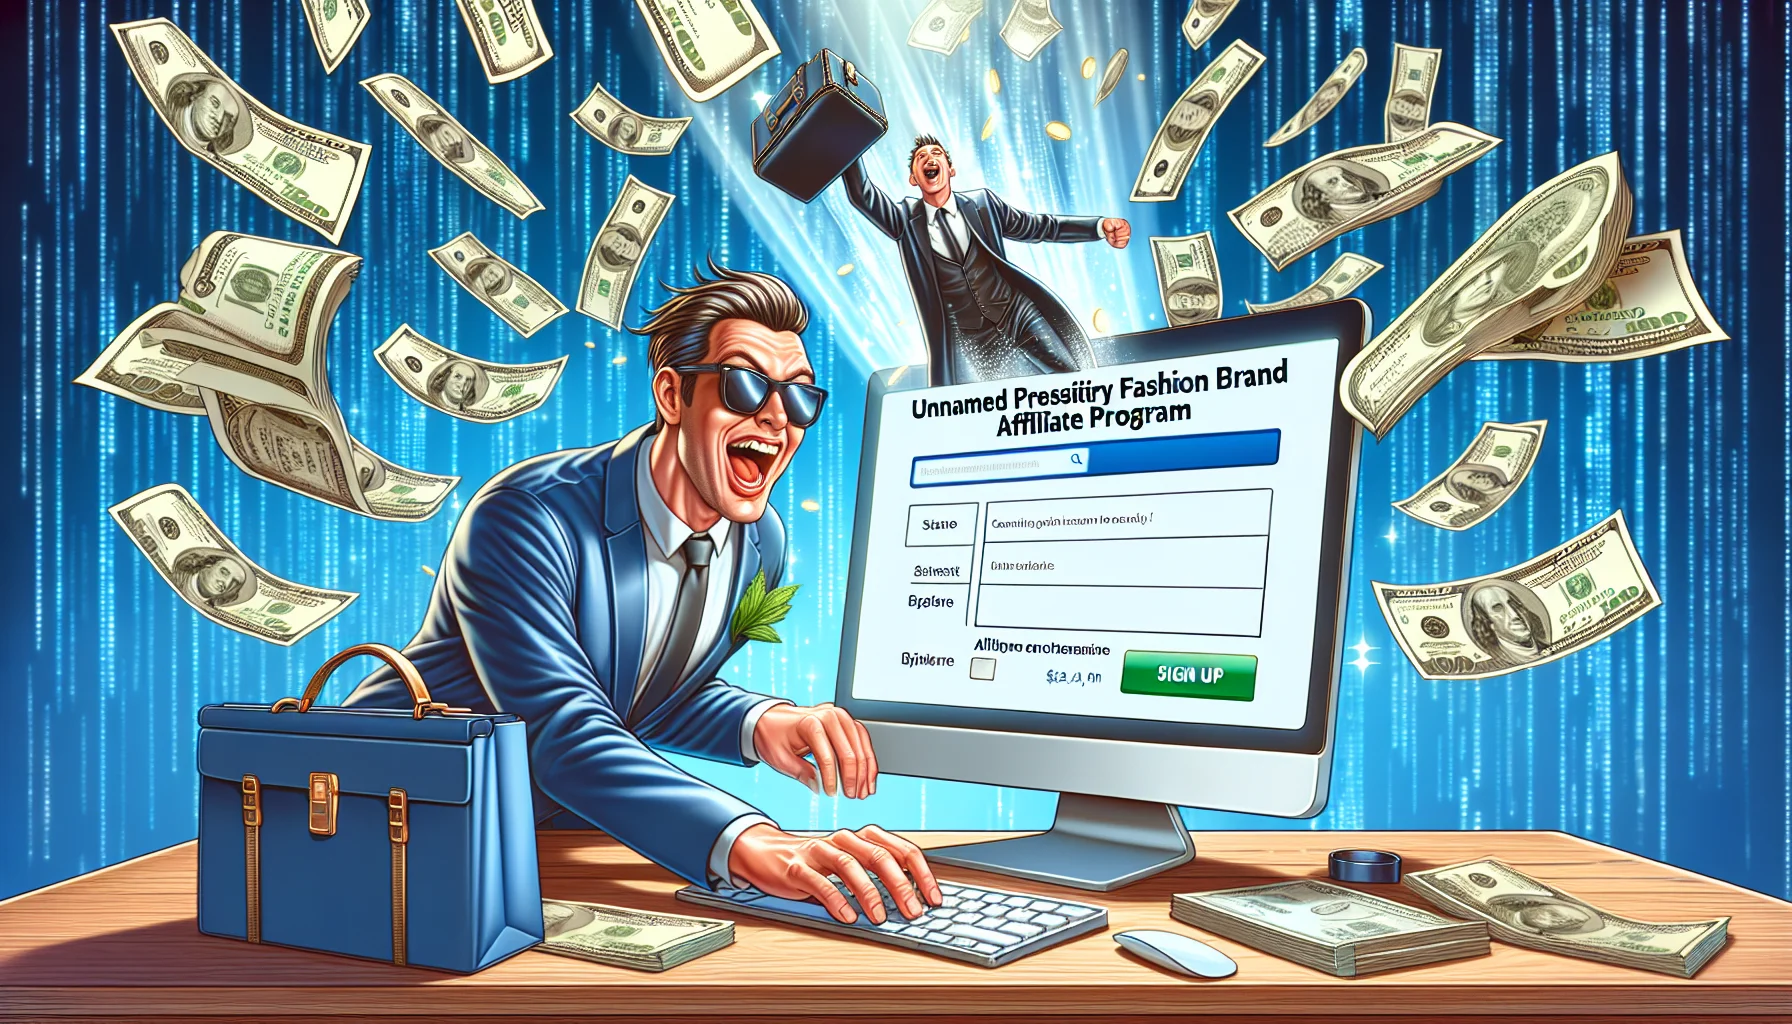 Create a humorous and lifelike image where an individual is signing up for an unnamed prestigious luxury fashion brand's affiliate program. Portray an exciting scenario related to generating income online. The scene may include, a computer showing the sign-up page, gleaming coins or dollar bills floating from the screen, an ecstatic individual, and the background may contain digital motifs to emphasize the online income aspect.